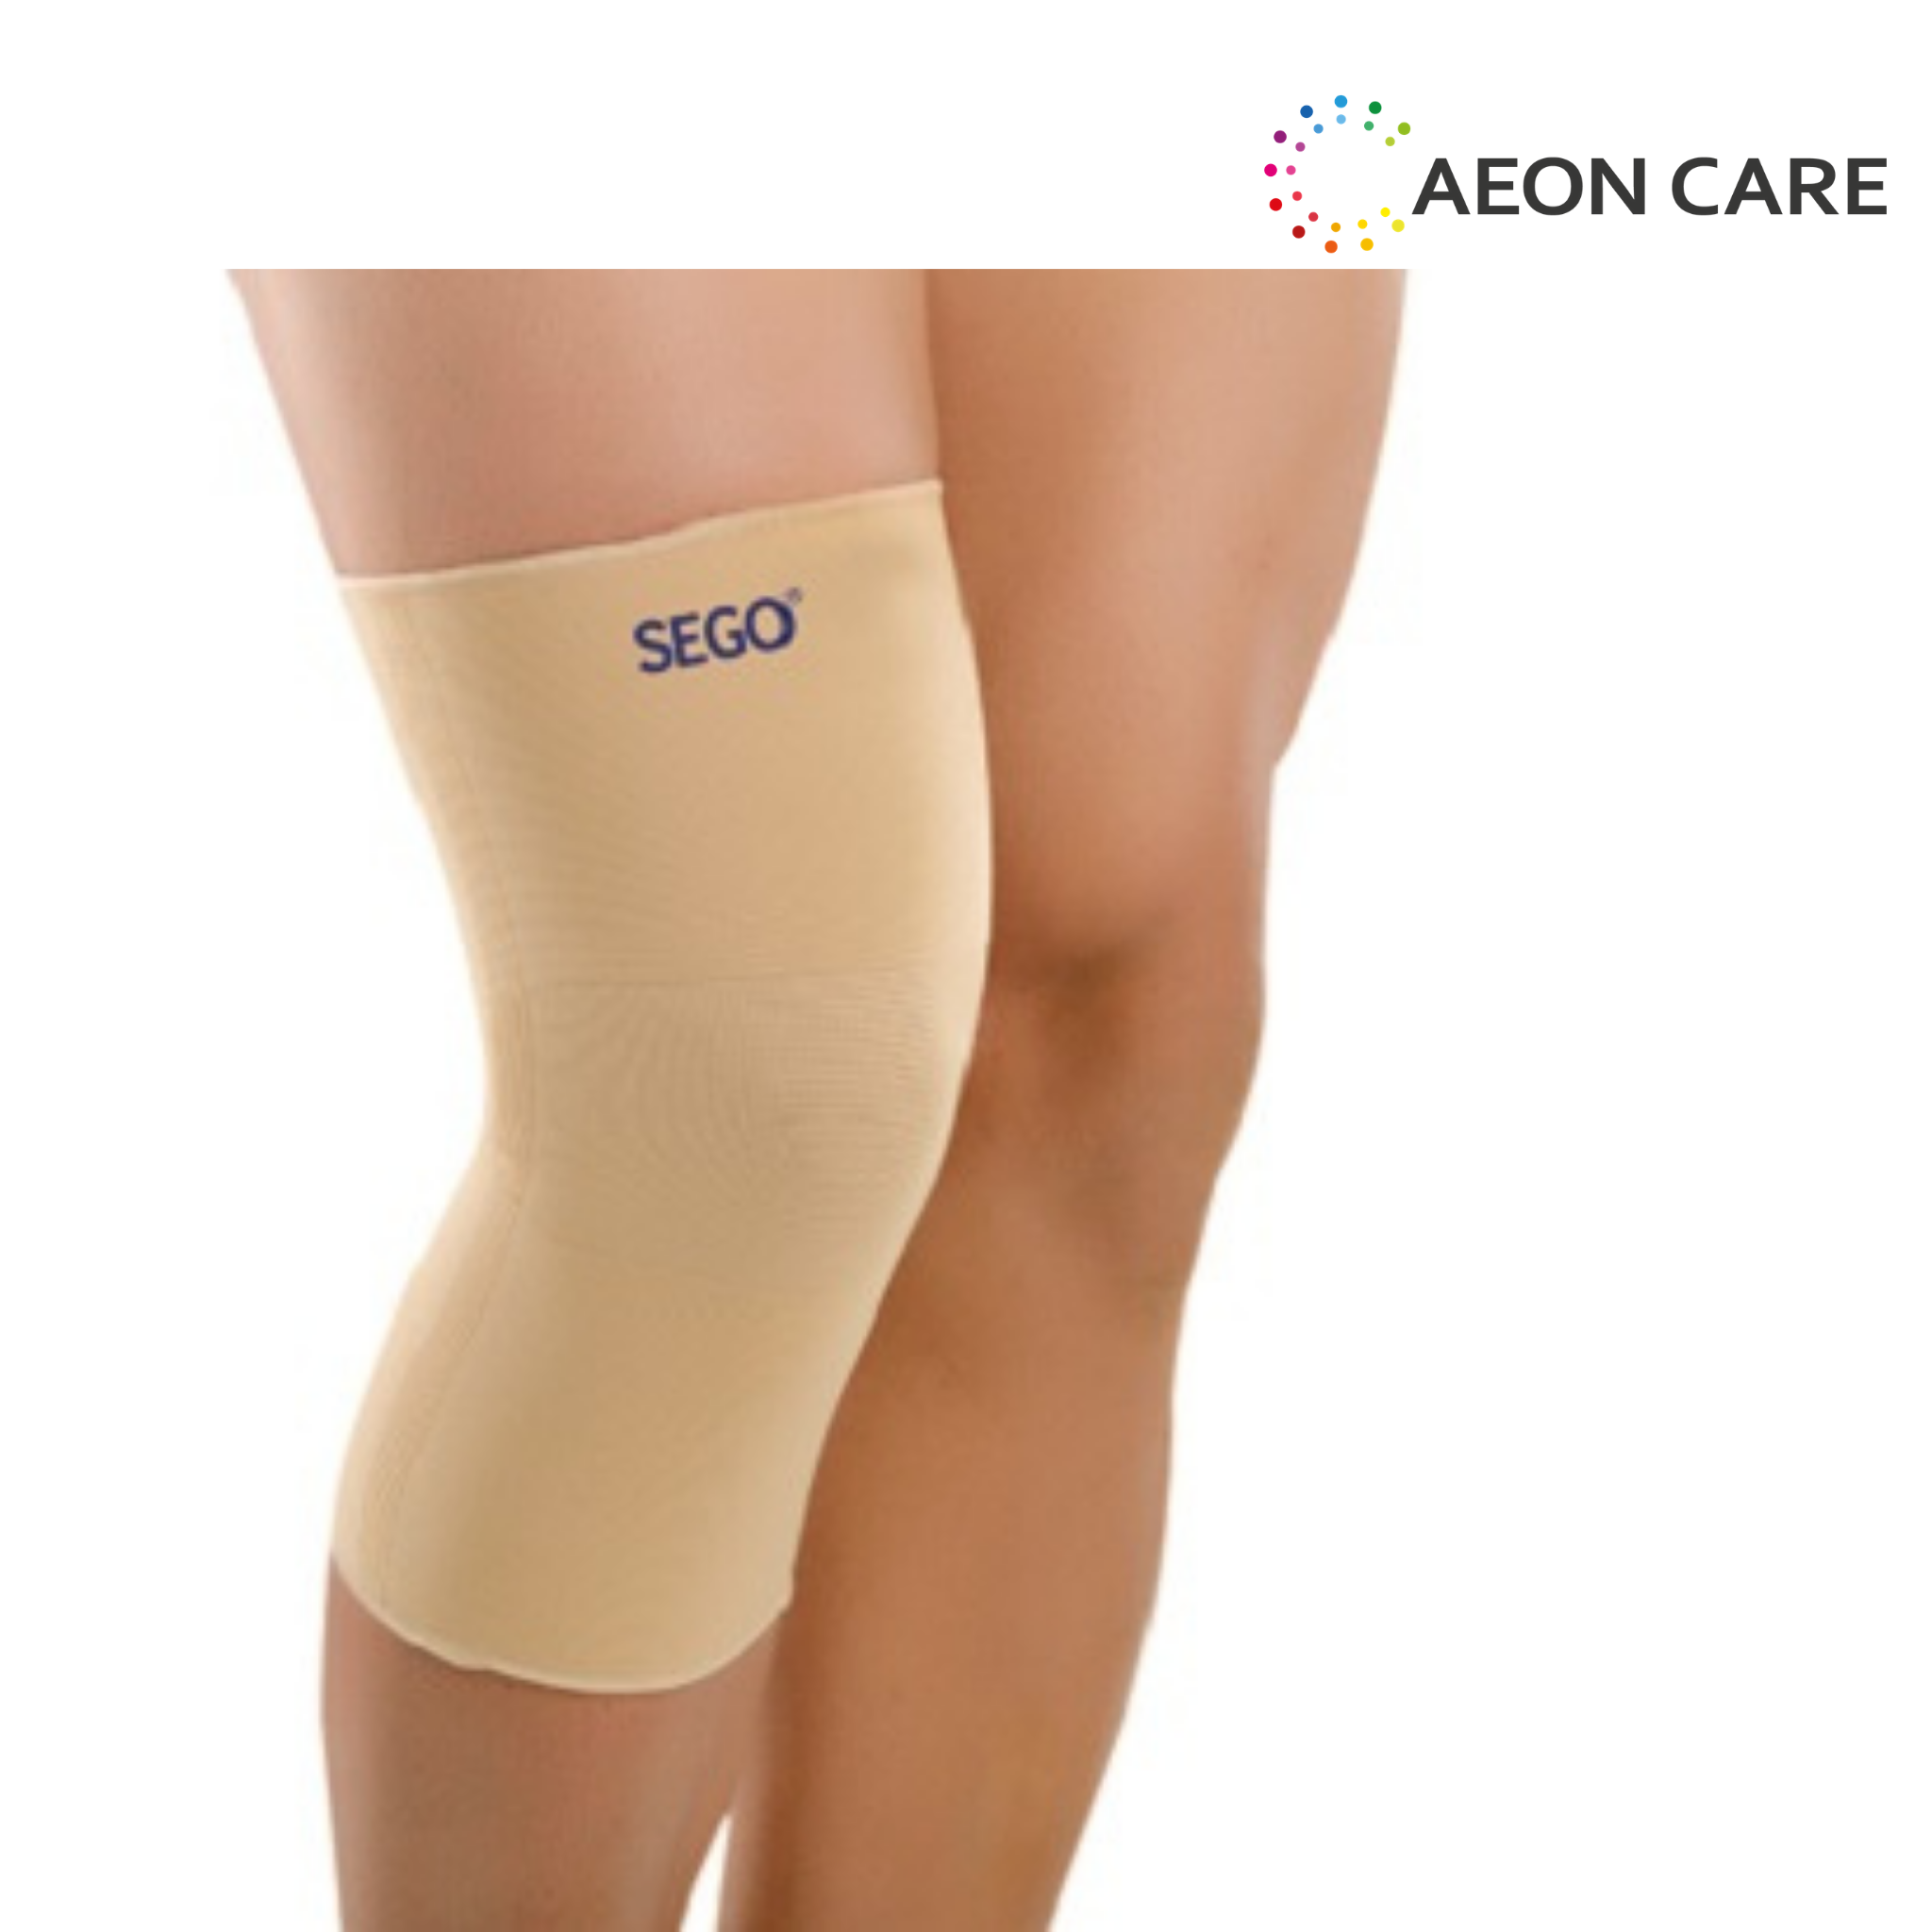 Sego Knee Support Band. Knee Support Belt is available at best Price in Chennai.